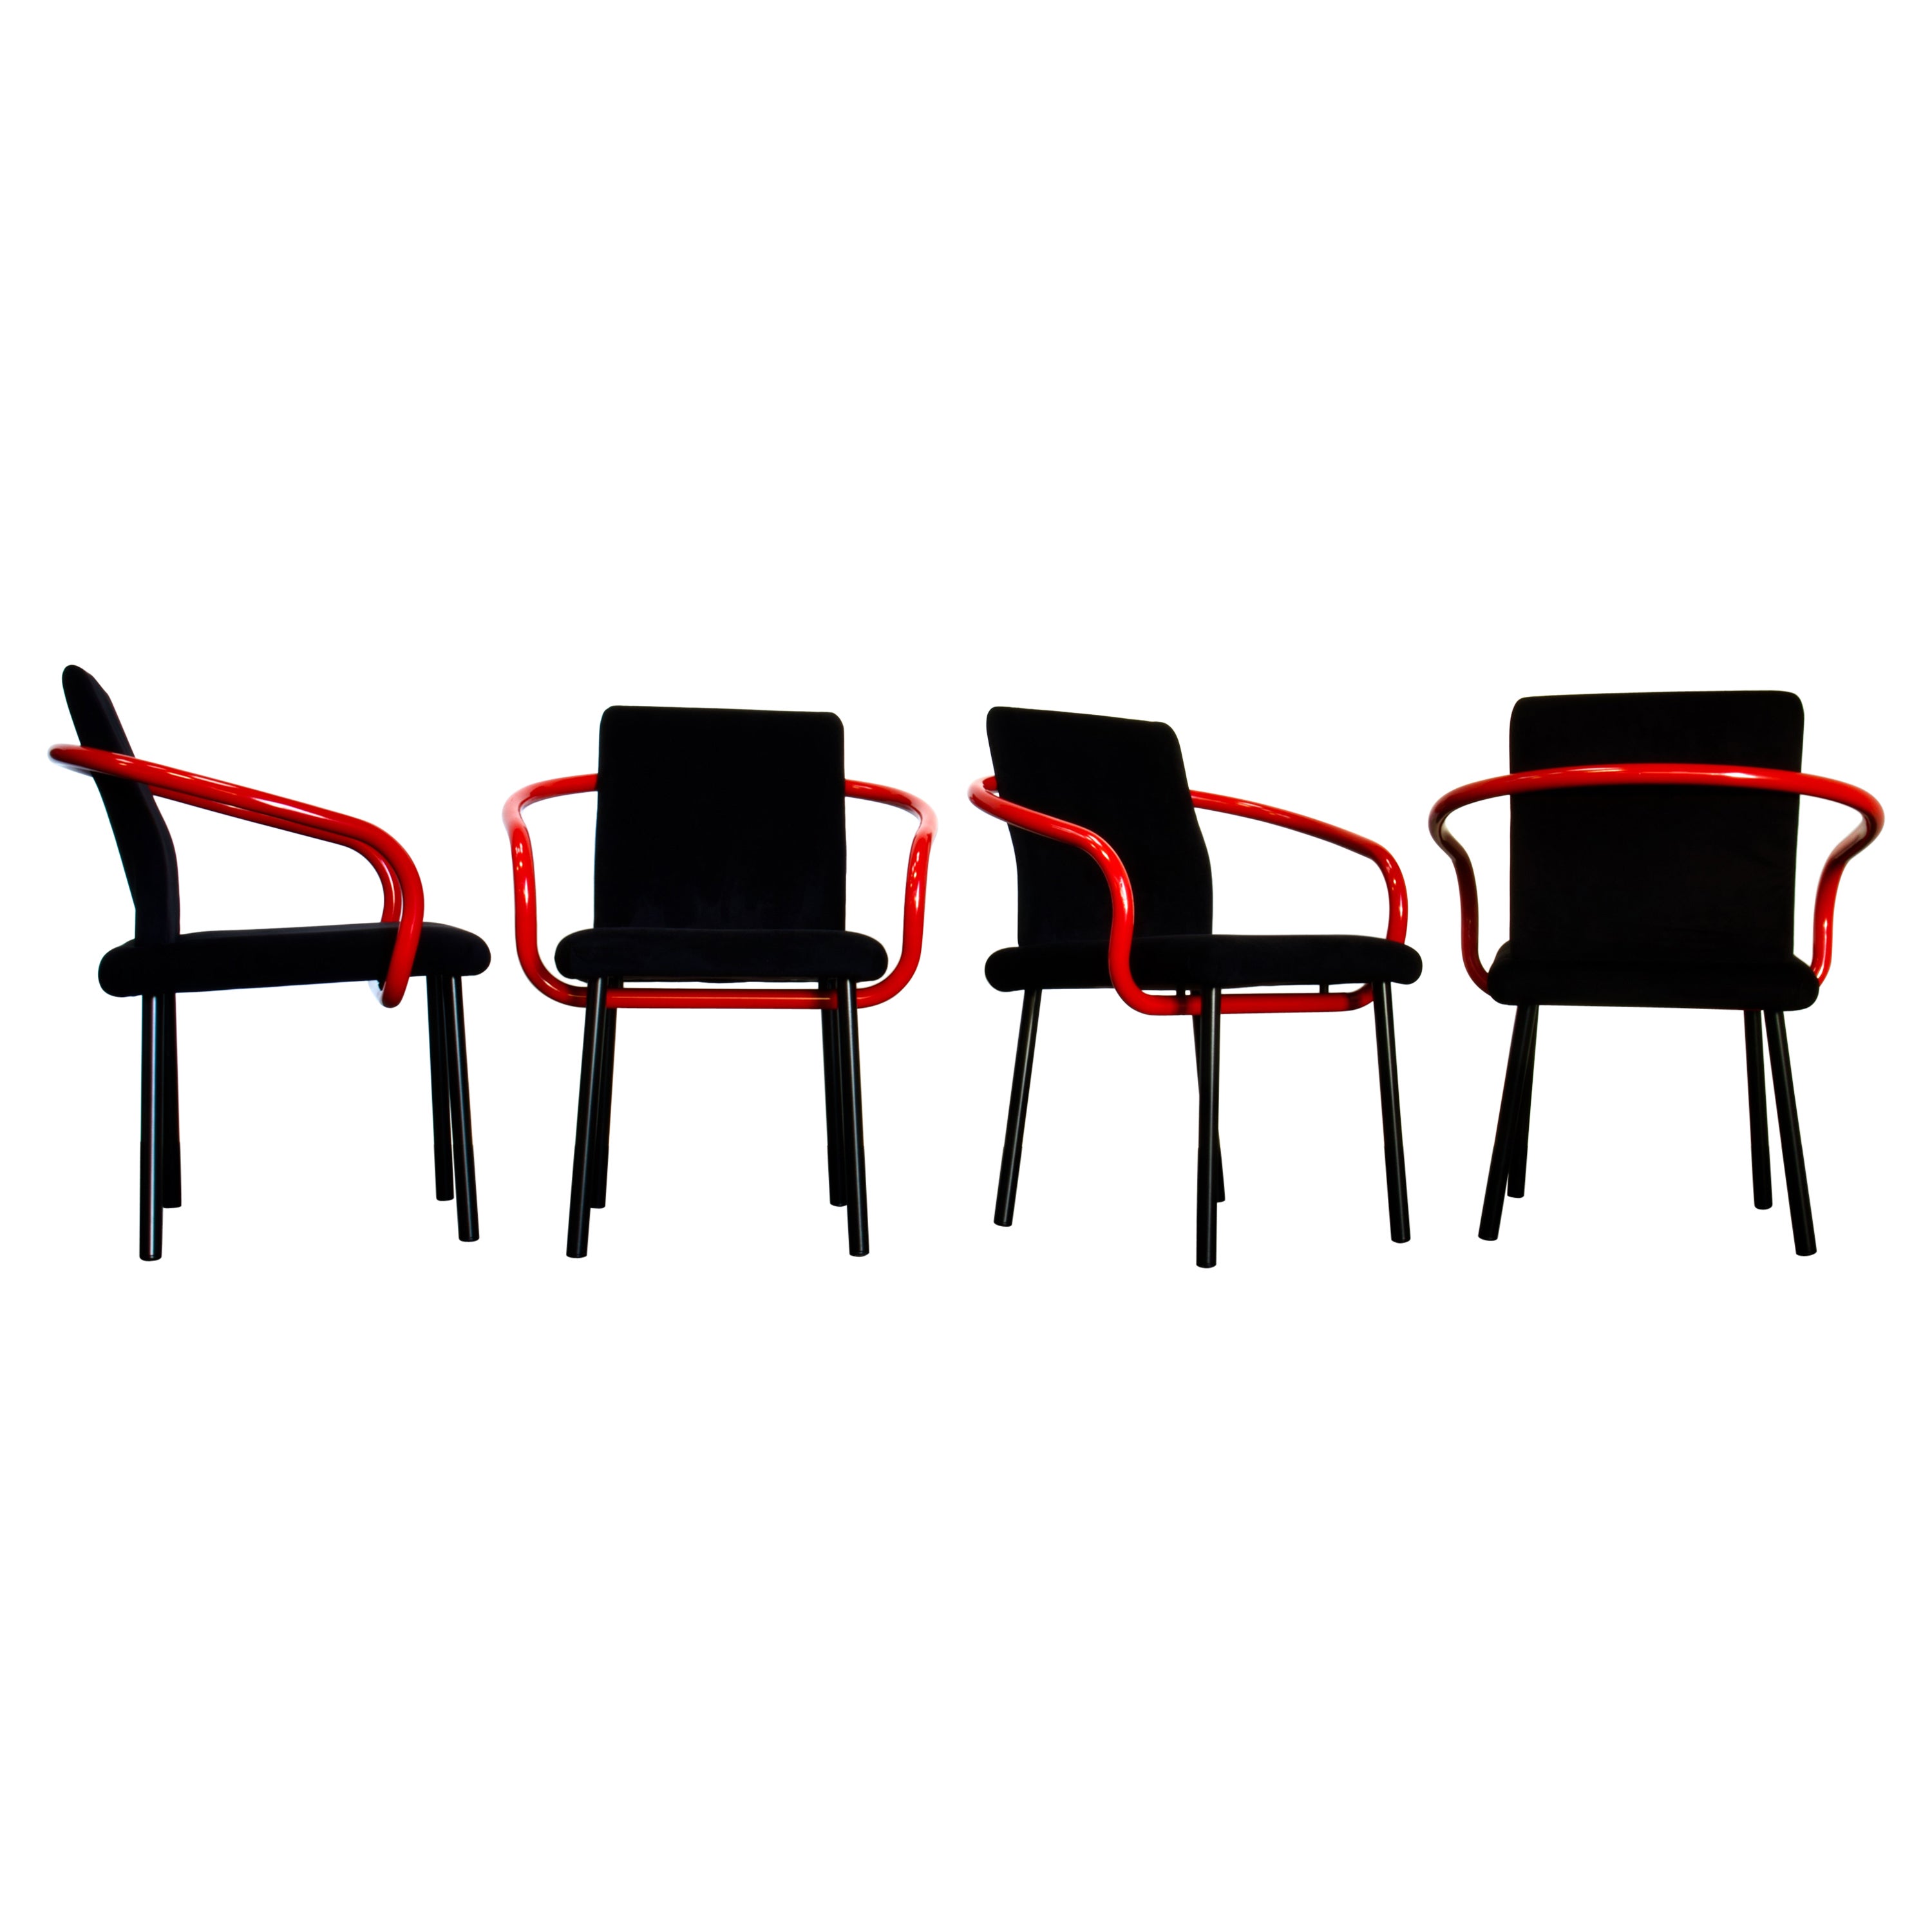 Four Ettore Sottsass Mandarin Chairs for Knoll in Red & Black, 1986 Italy For Sale